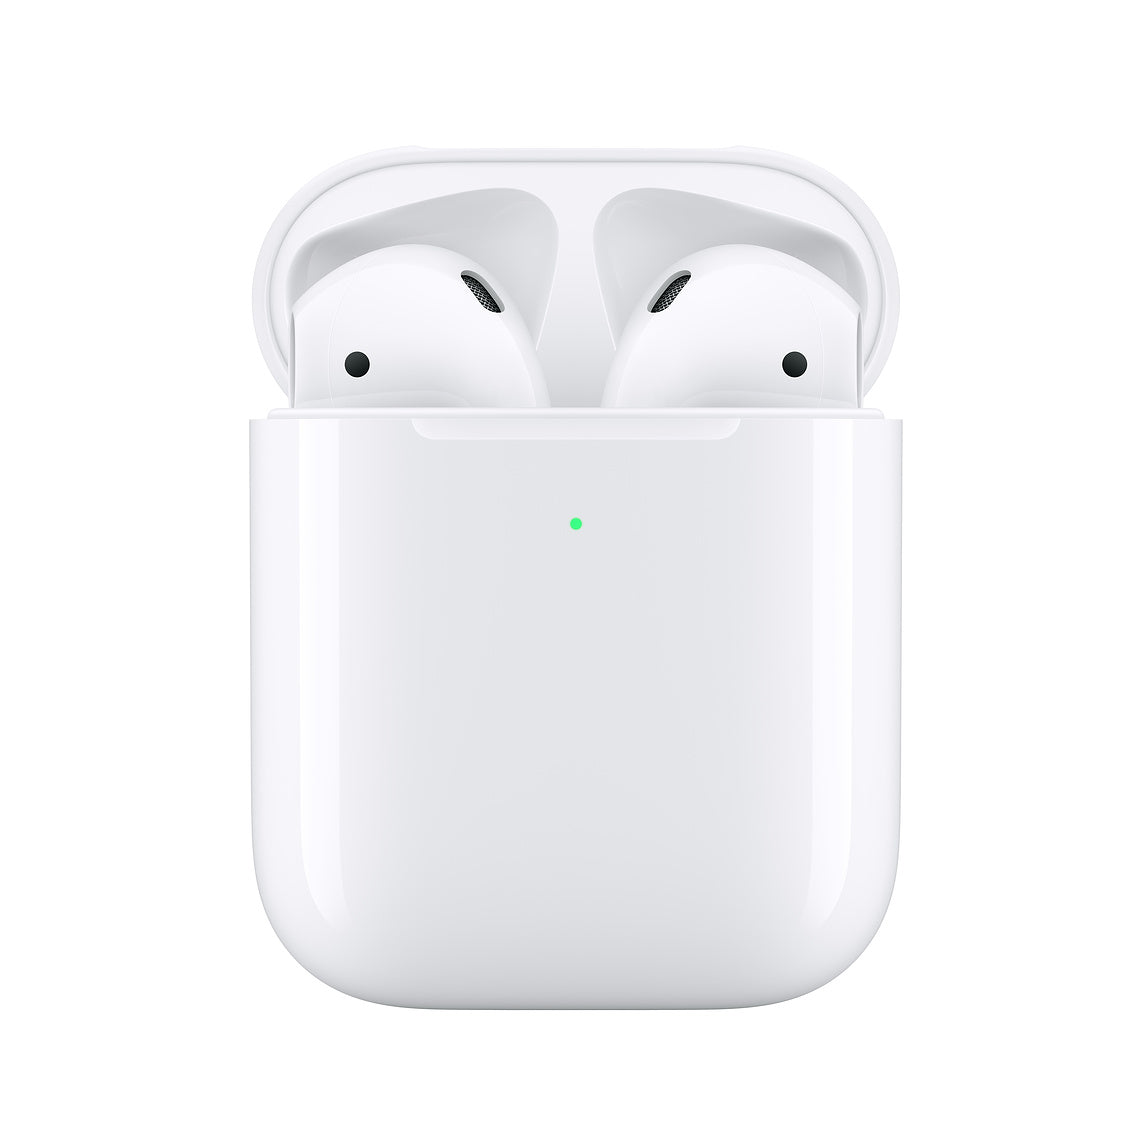 Apple Airpods 2nd Generation Mobile Phone Accessories linkupbah